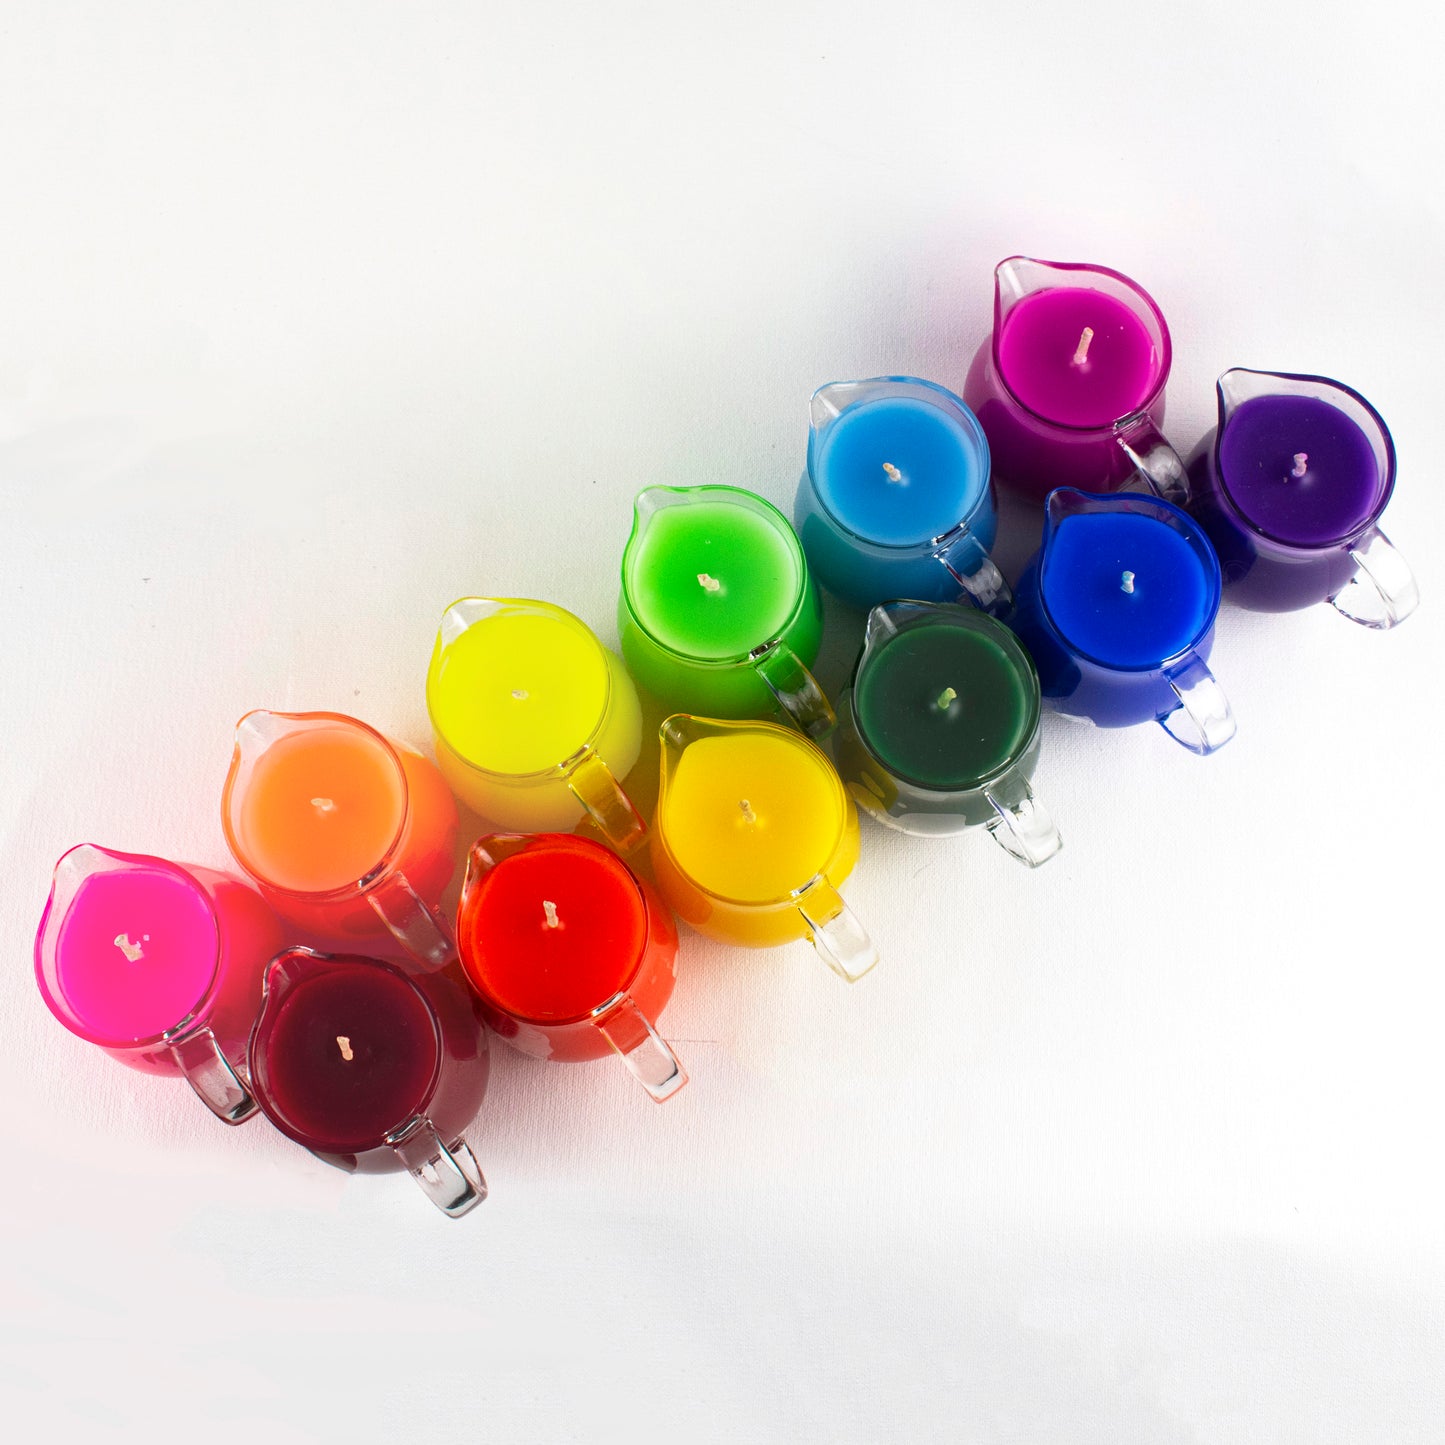 Rainbow & Pride Flag Candle Sets - Wax Play Pitcher Candles - Pride Rainbow